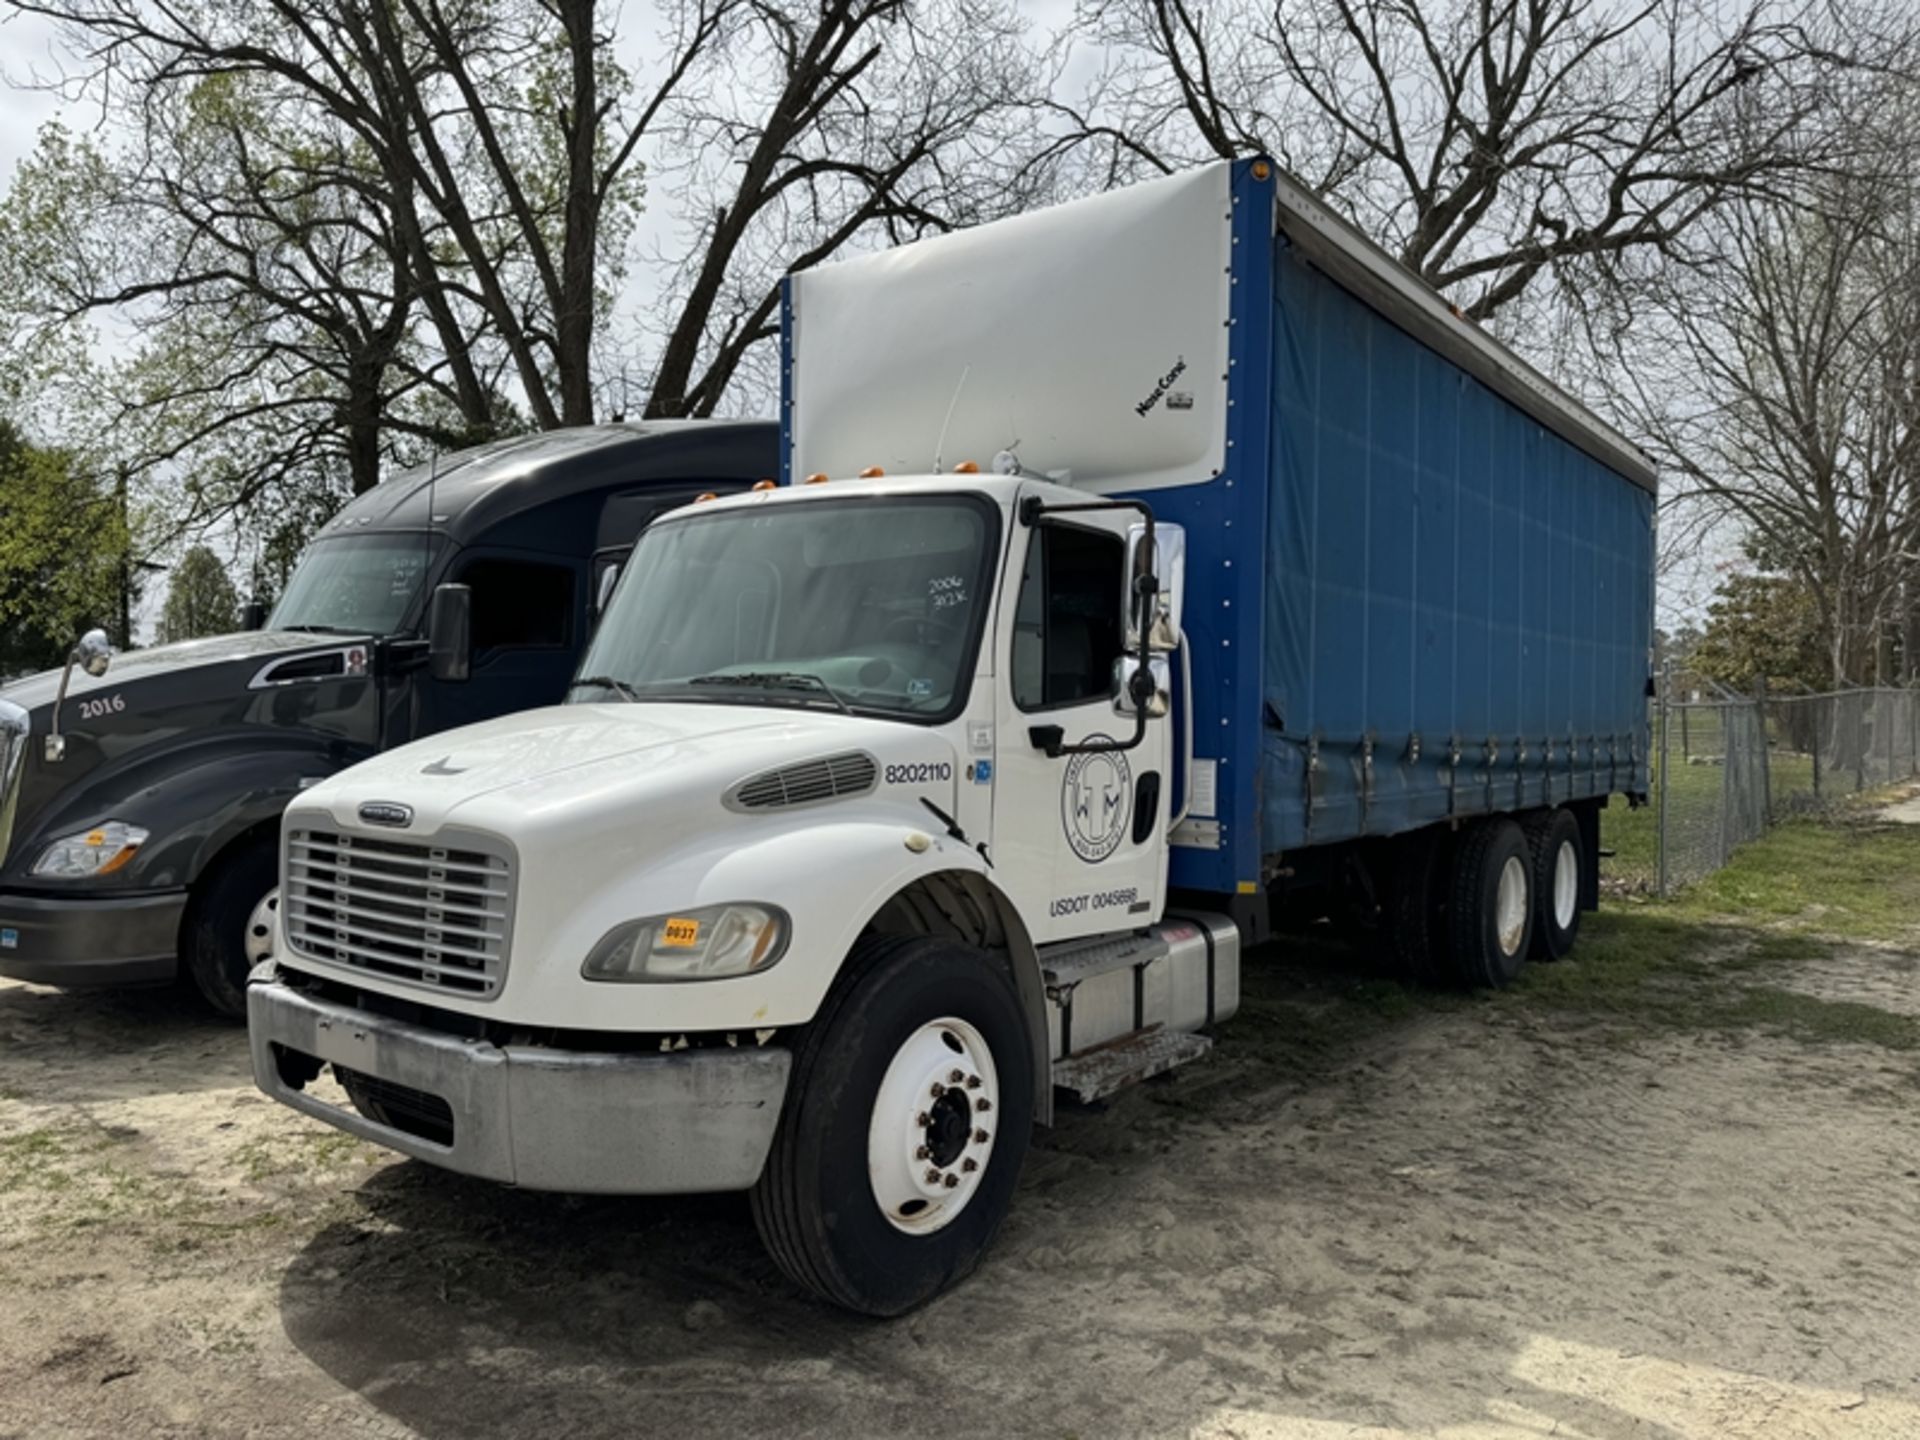 2006 FREIGHTLINER 24' curtain body truck tandem axle, CAT dsl, 9spd - 312,920 miles showing -